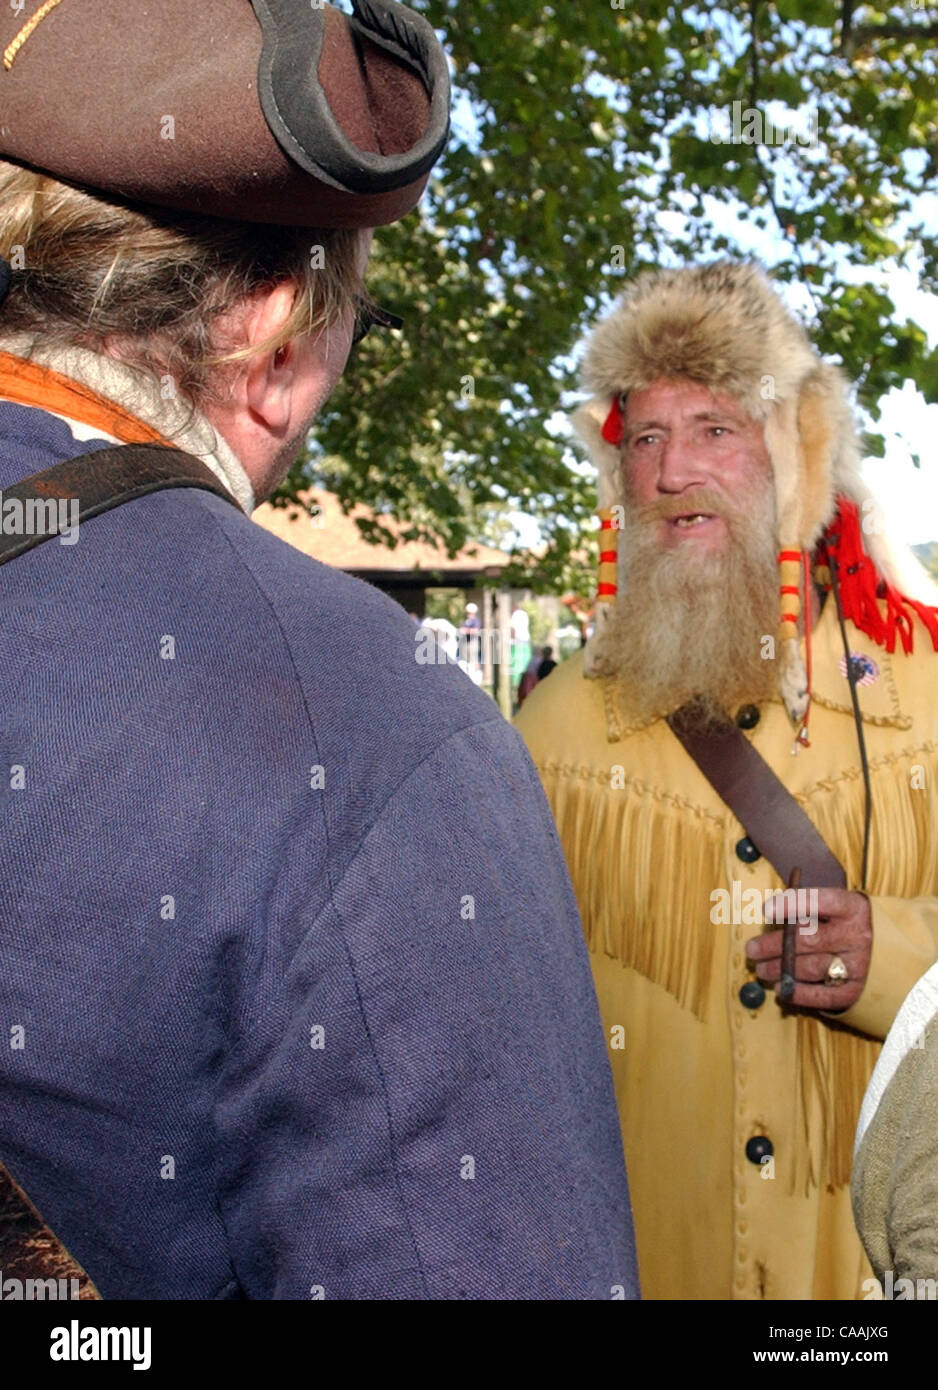 Sep 06, 2003 - Covington, Kentucky, USA - Pioneer Days celebrated 'The Pioneer Political Soap Box' at Pioneer Park on KY 17.  BAILEY PETTY of Walton KY, costumed as Simon Kenton, talks with WAYNE MILTON, of Erlanger, who is dressed as Kentucky pioneer William Poage, complete with a 1700's tri-corner Stock Photo